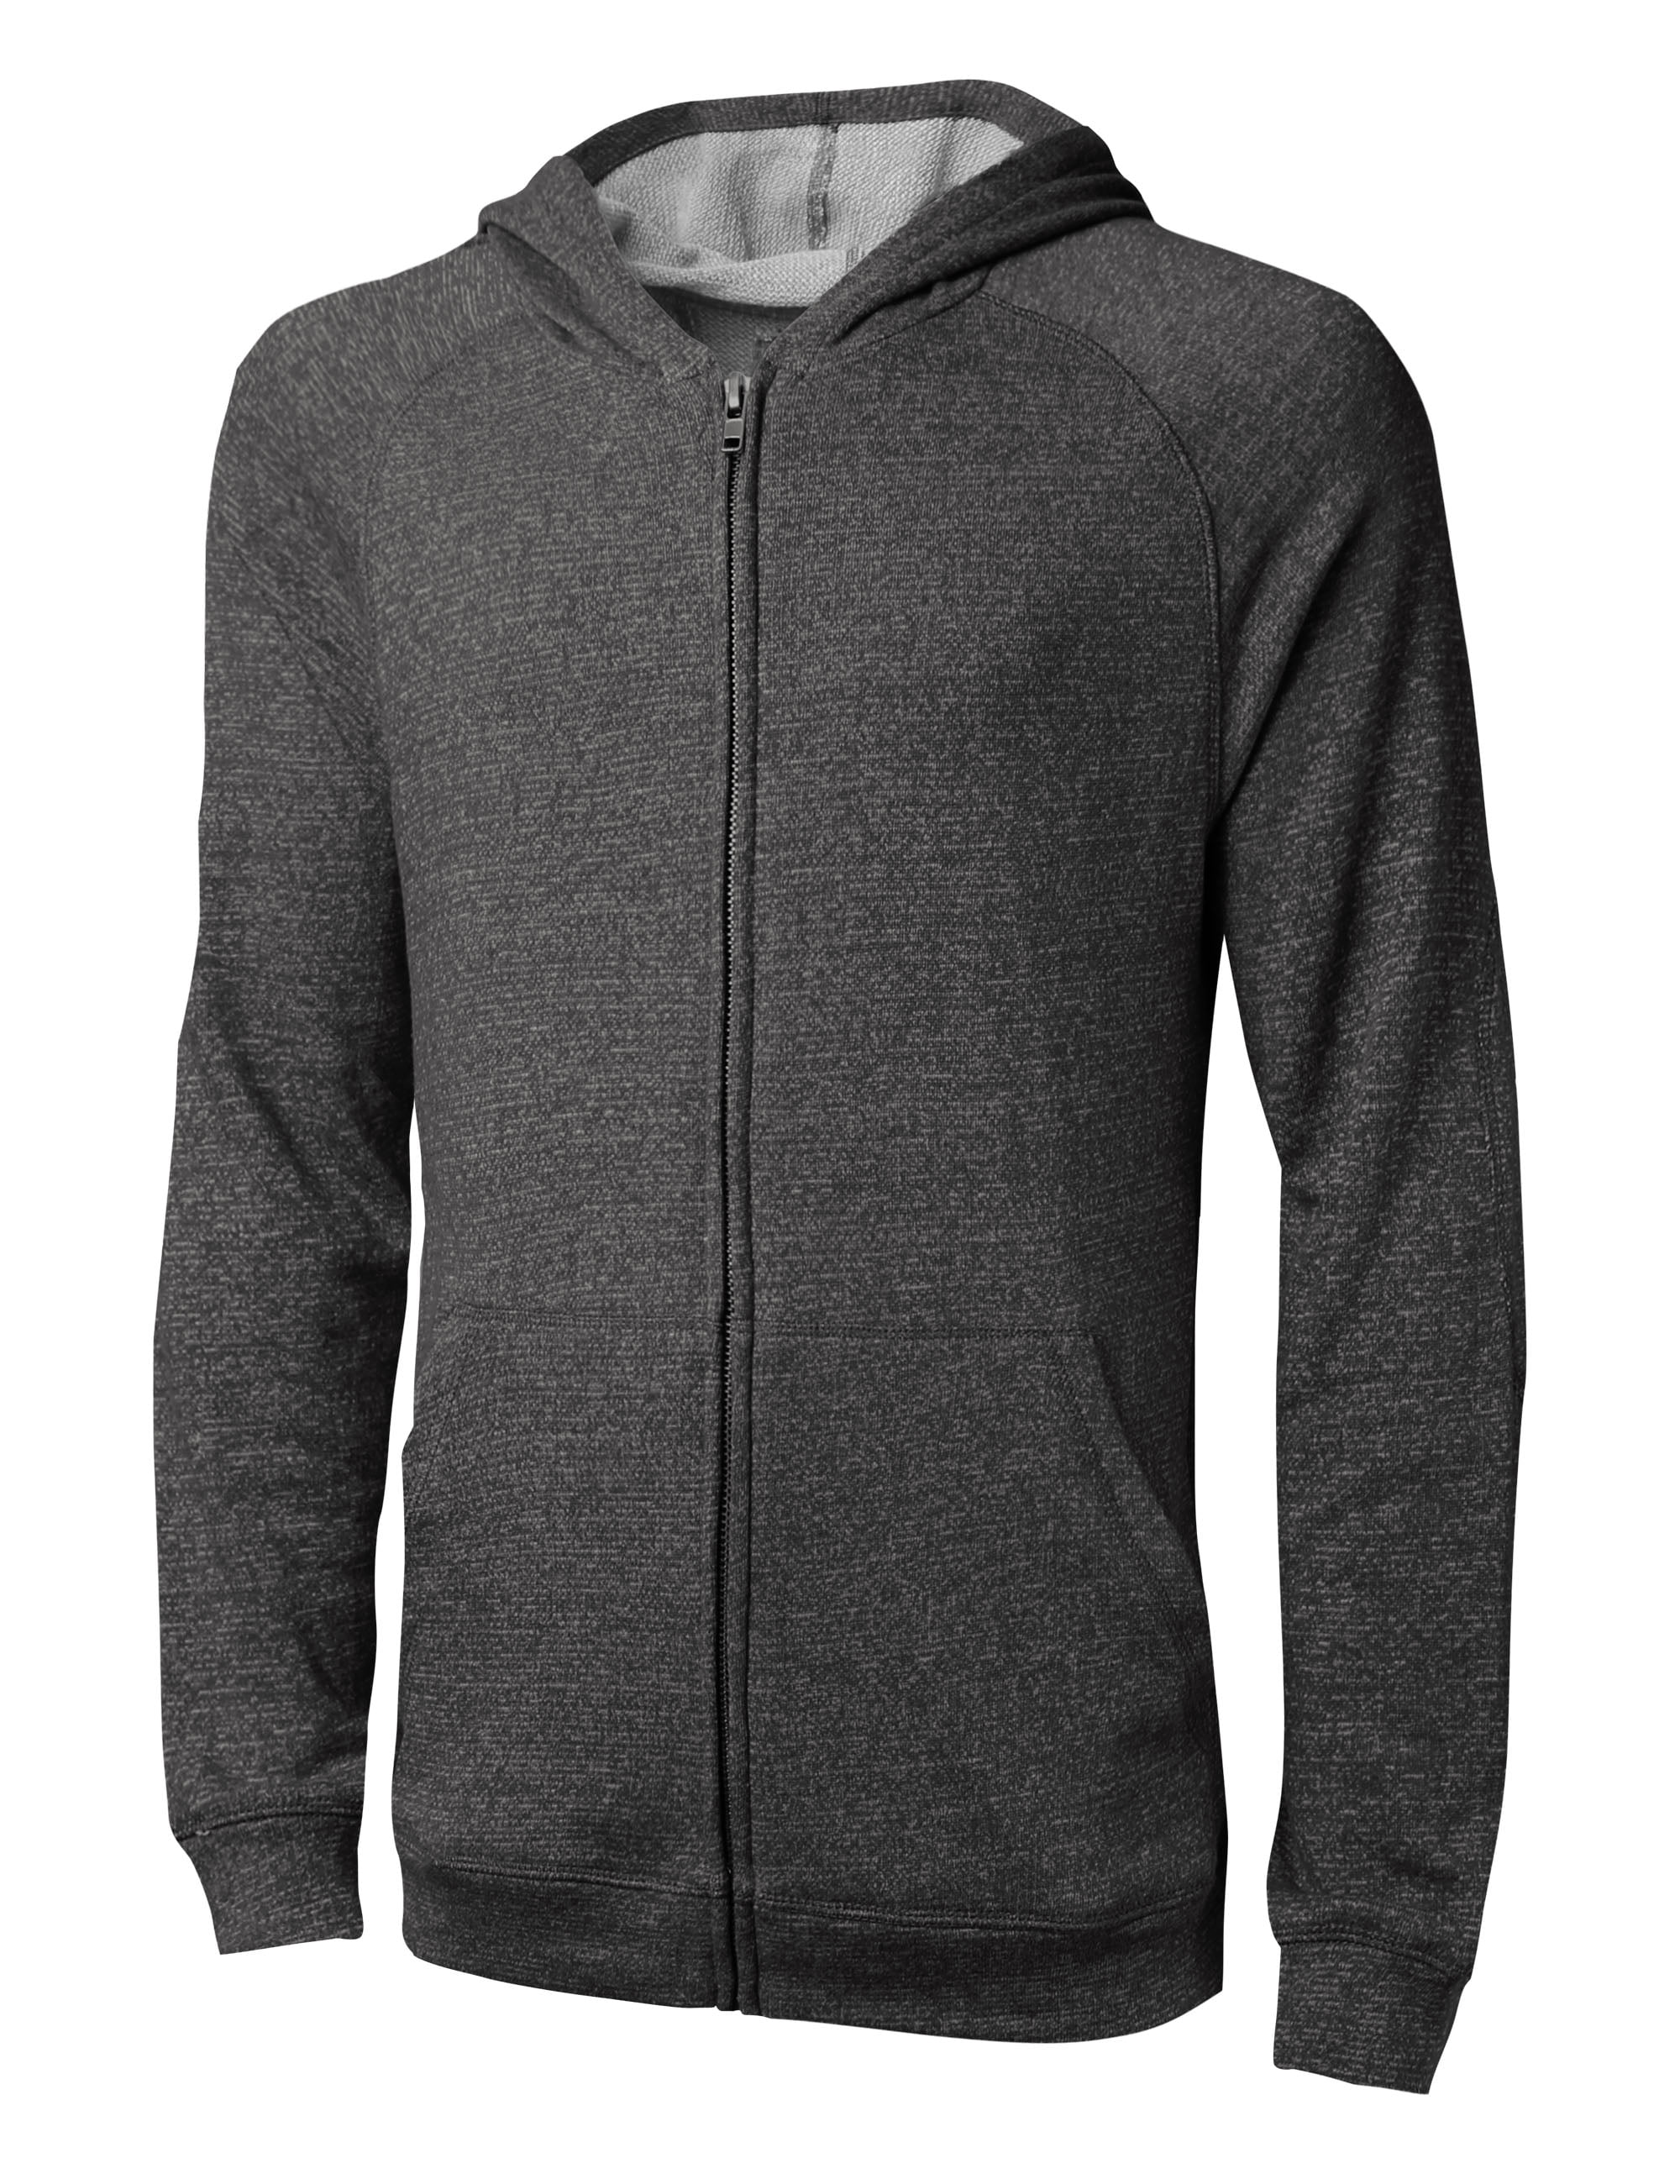 Mens French Terry Fleece Lightweight Zip Up Hoodie with Elbow Patches ...